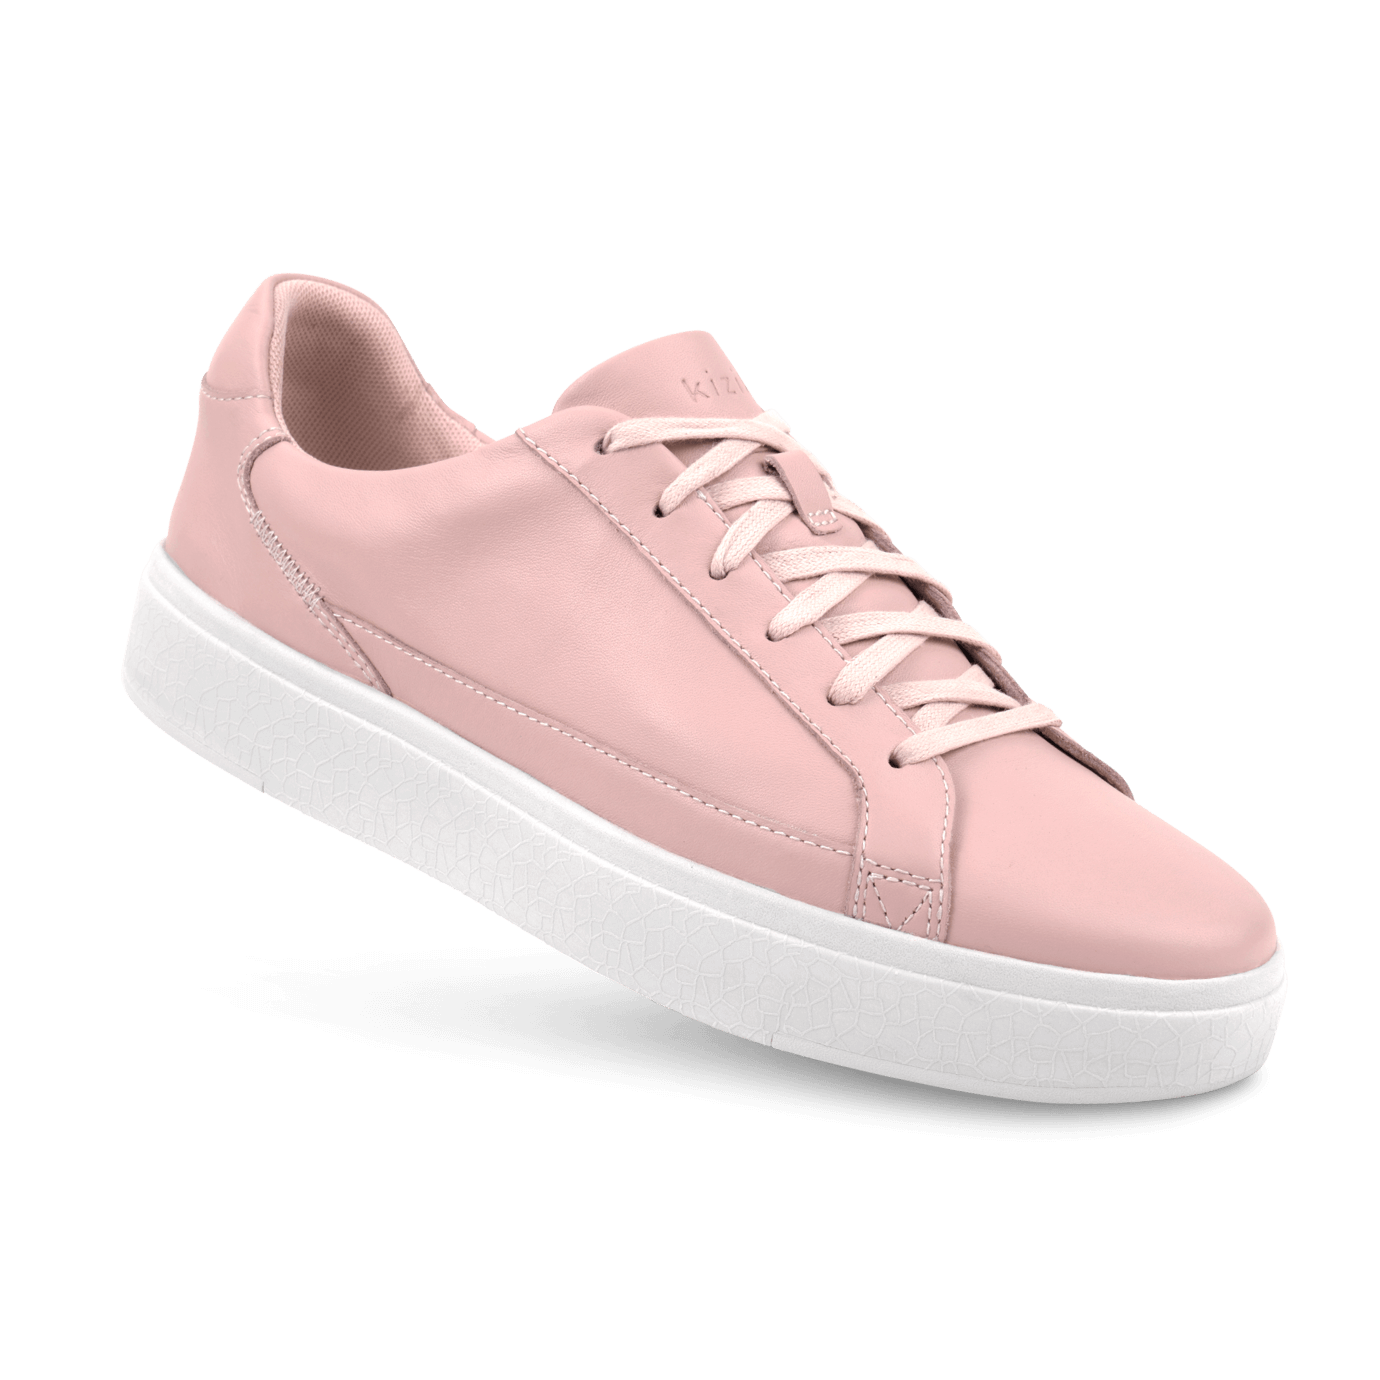 Bink's Outfitters - Blush pink ON running shoes 😍 #oncloud